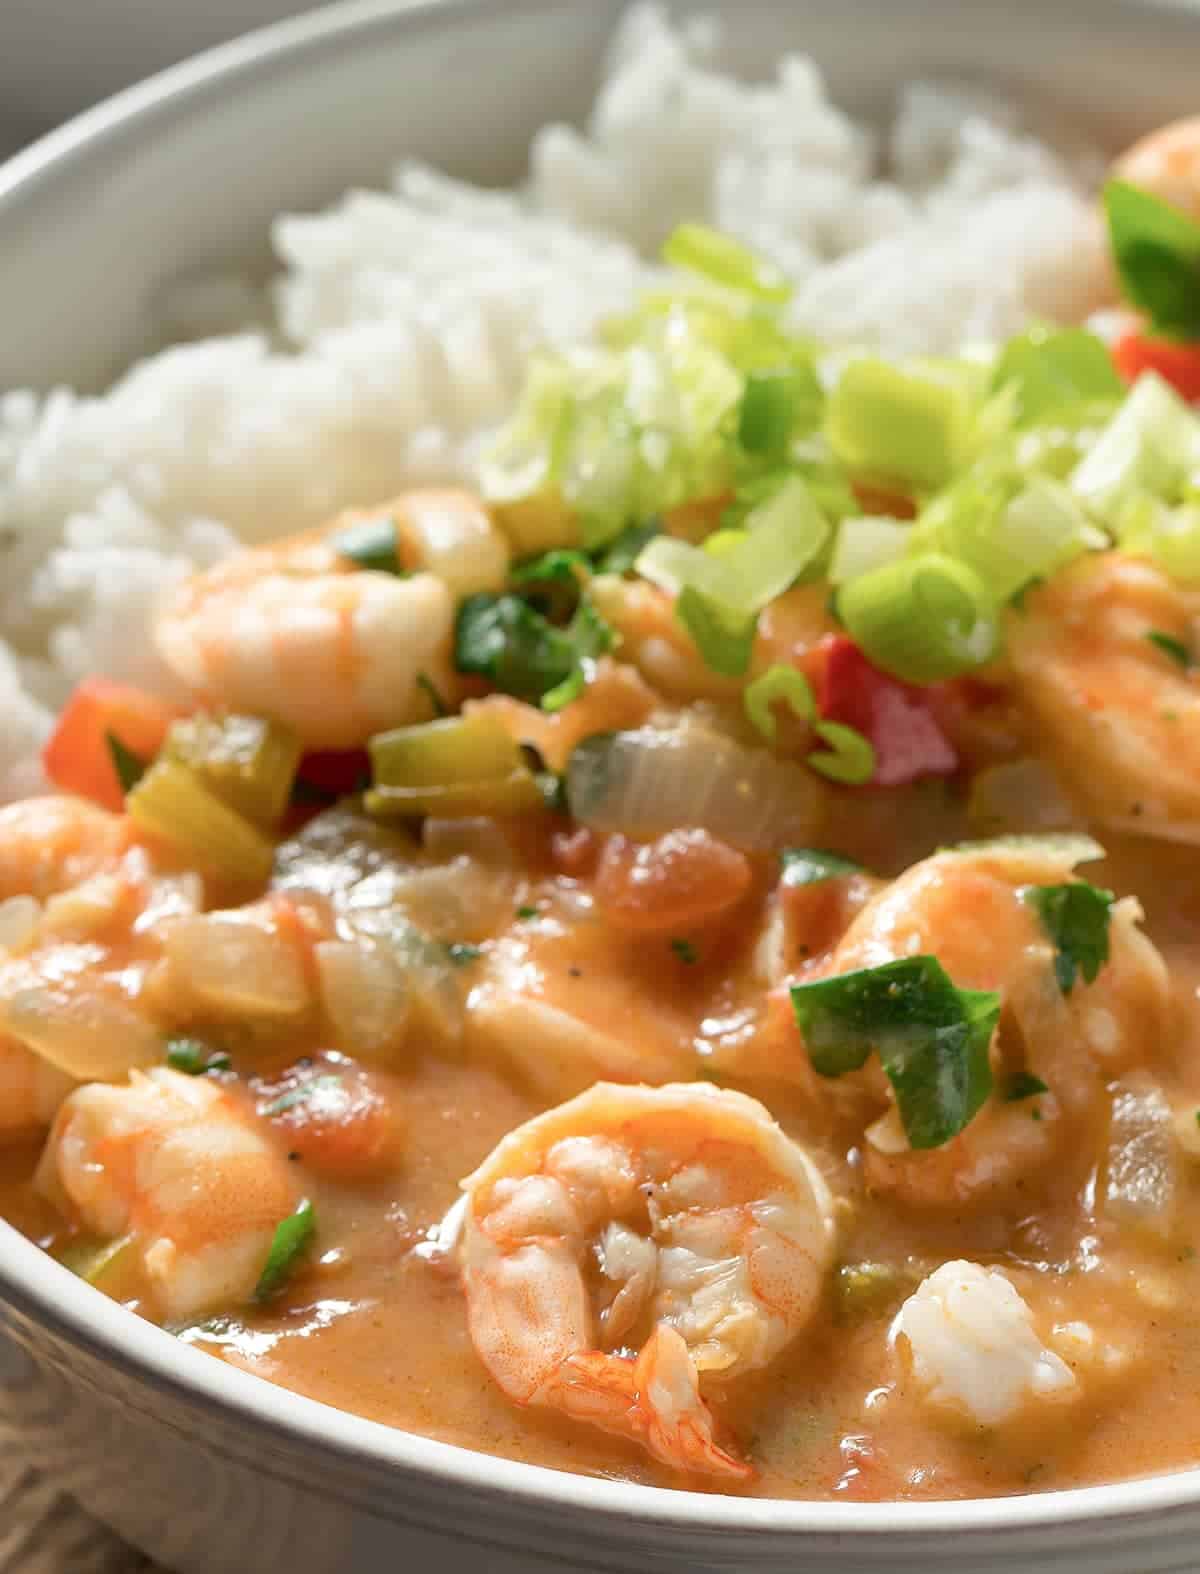 Bowl full of delicious cajun shrimp etouffee with flavorful broth over white rice, garnished with sliced green onions. 